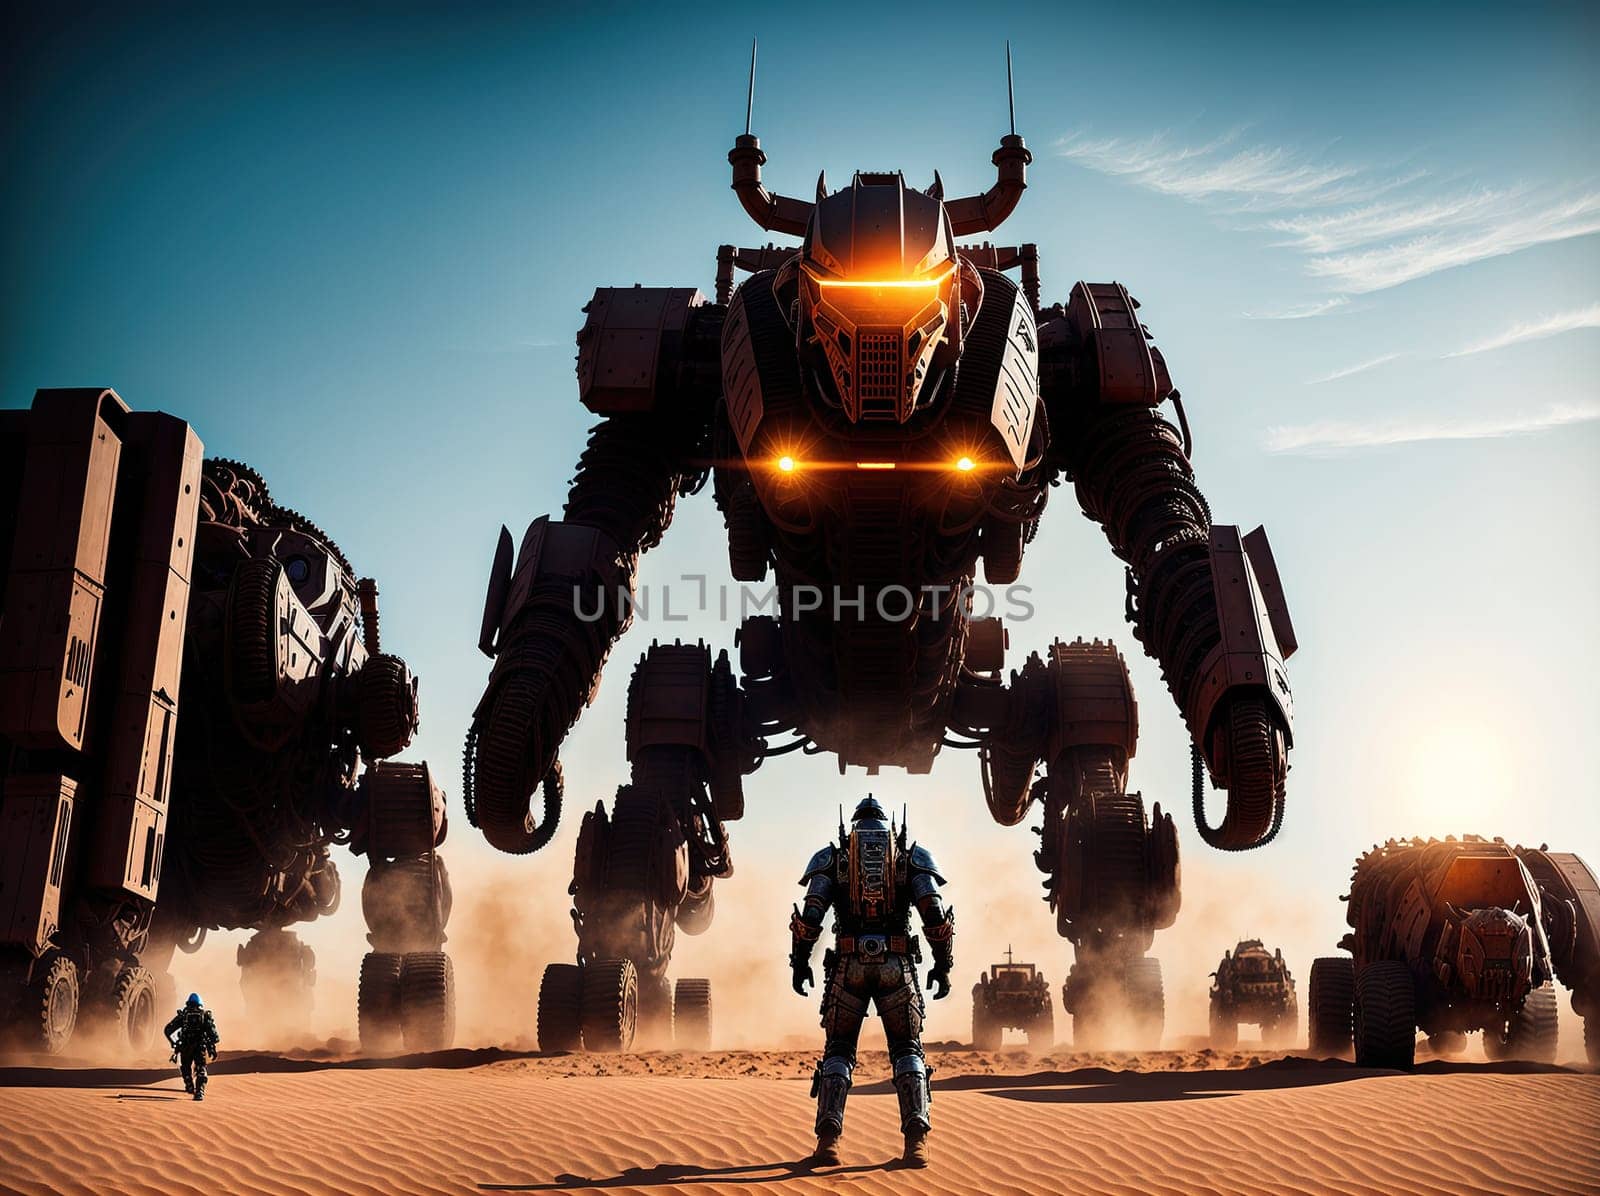 The image shows a group of robots standing in the middle of a desert, with one of them holding a large gun and the others standing around it in a formation.